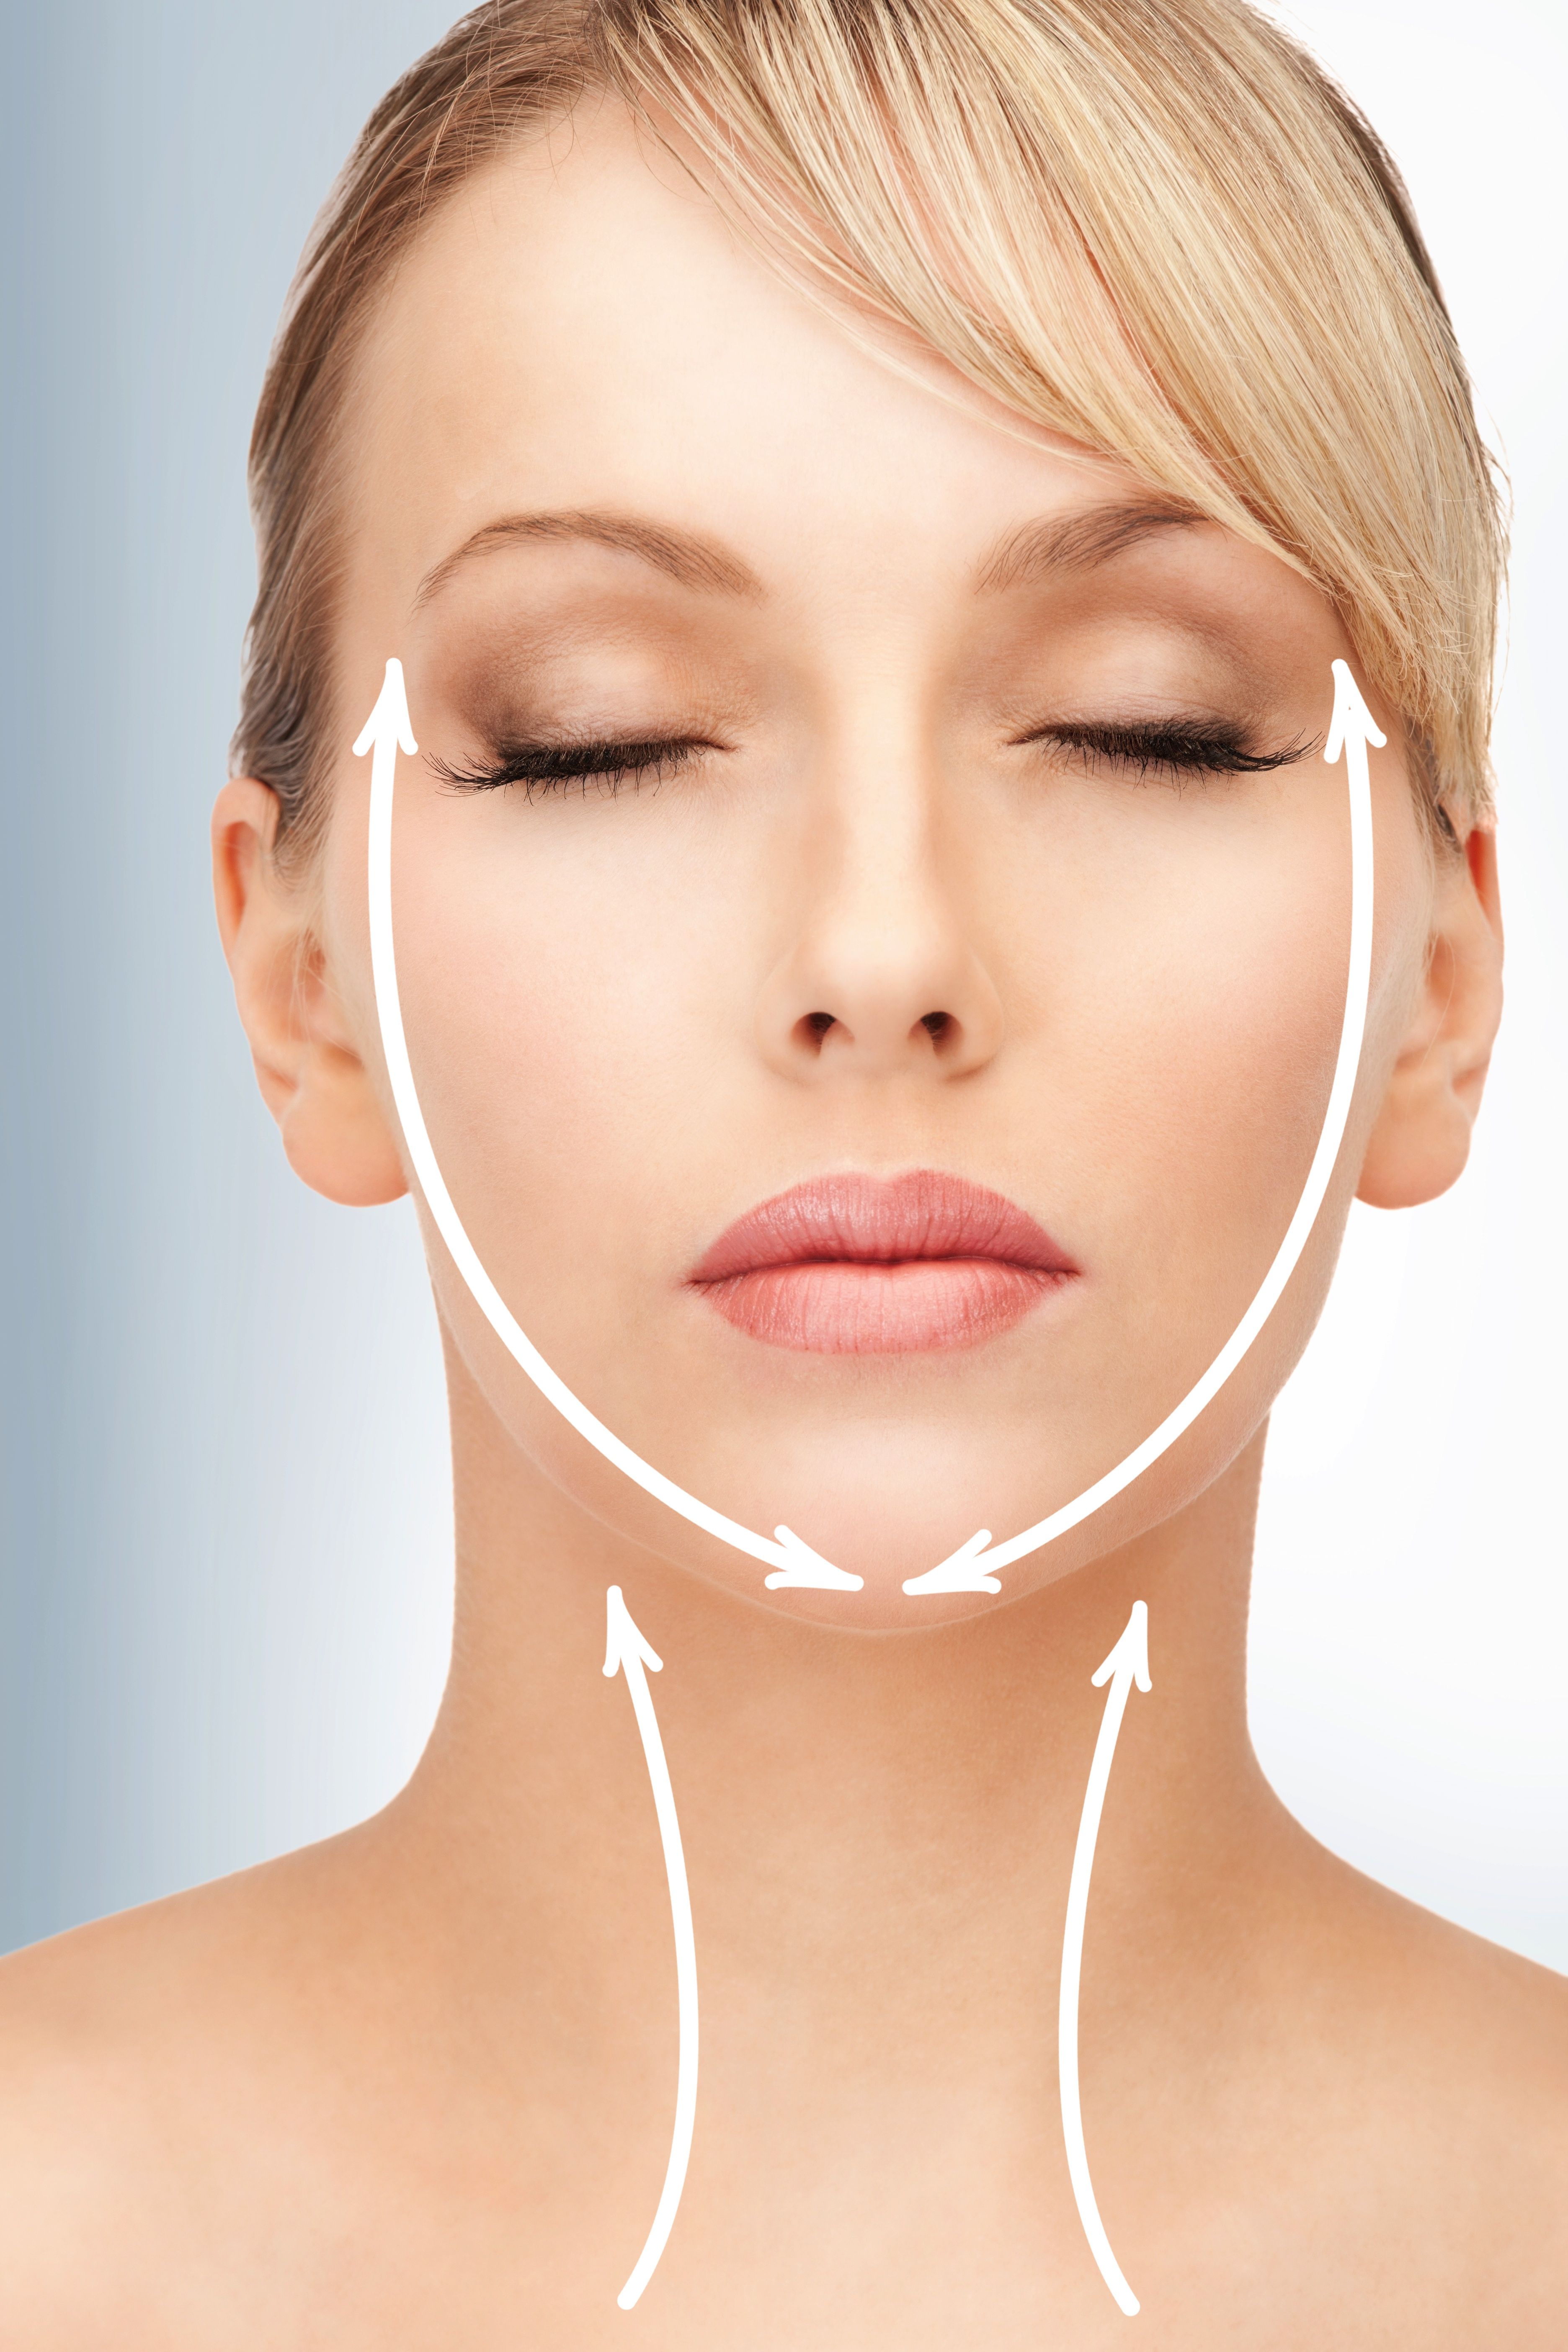 Help! How To Reduce Undesirable Face Fat in Dubai